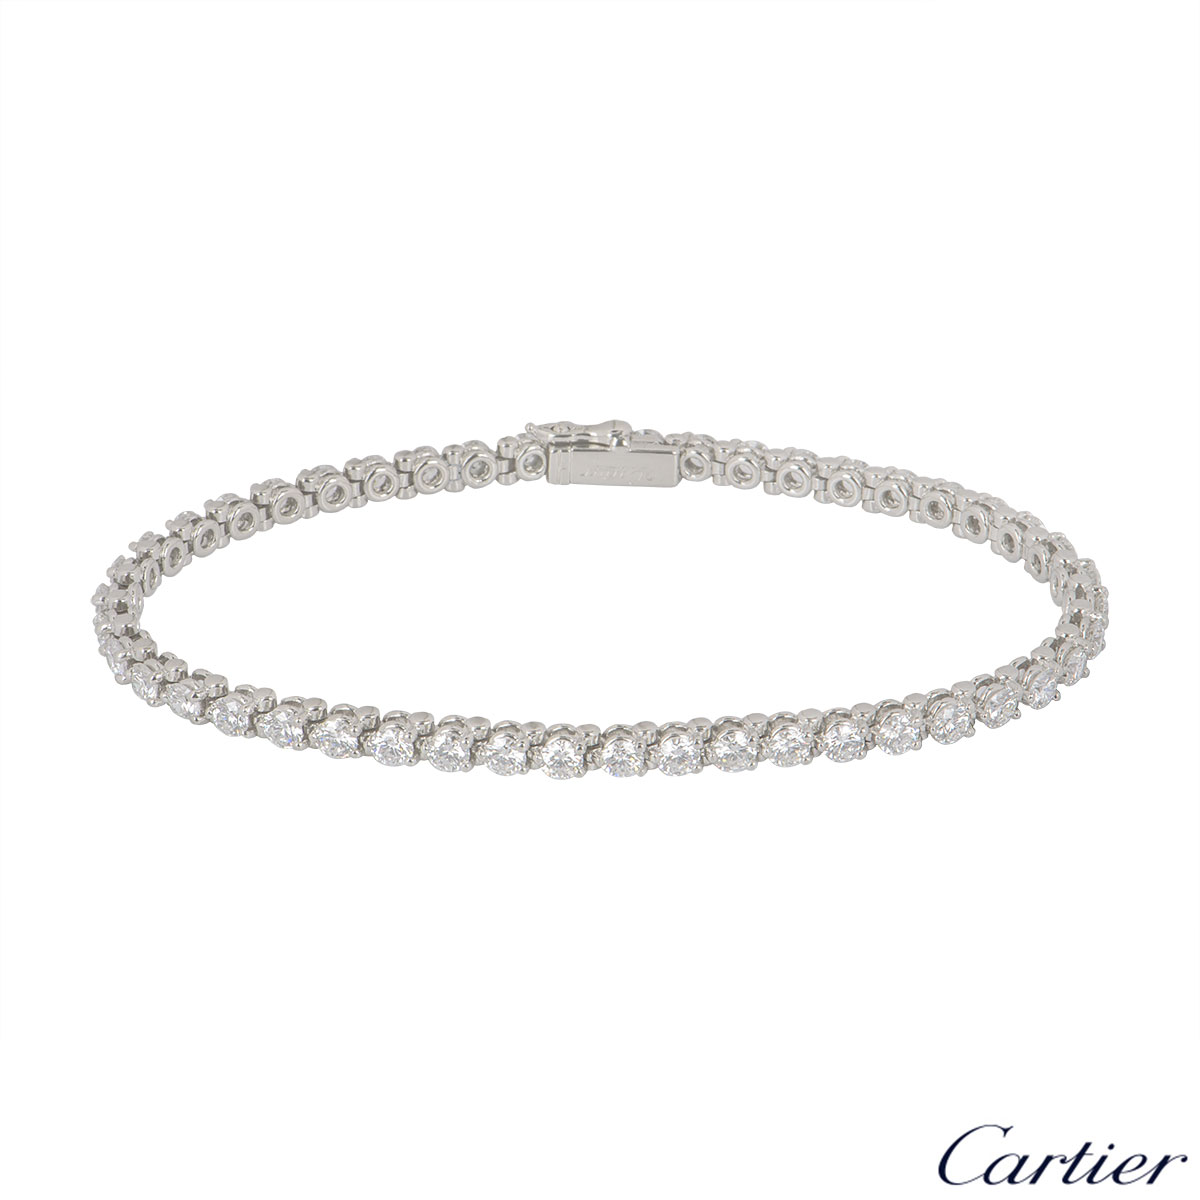 CRB6058718 - Trinity bracelet - White gold, yellow gold, rose gold